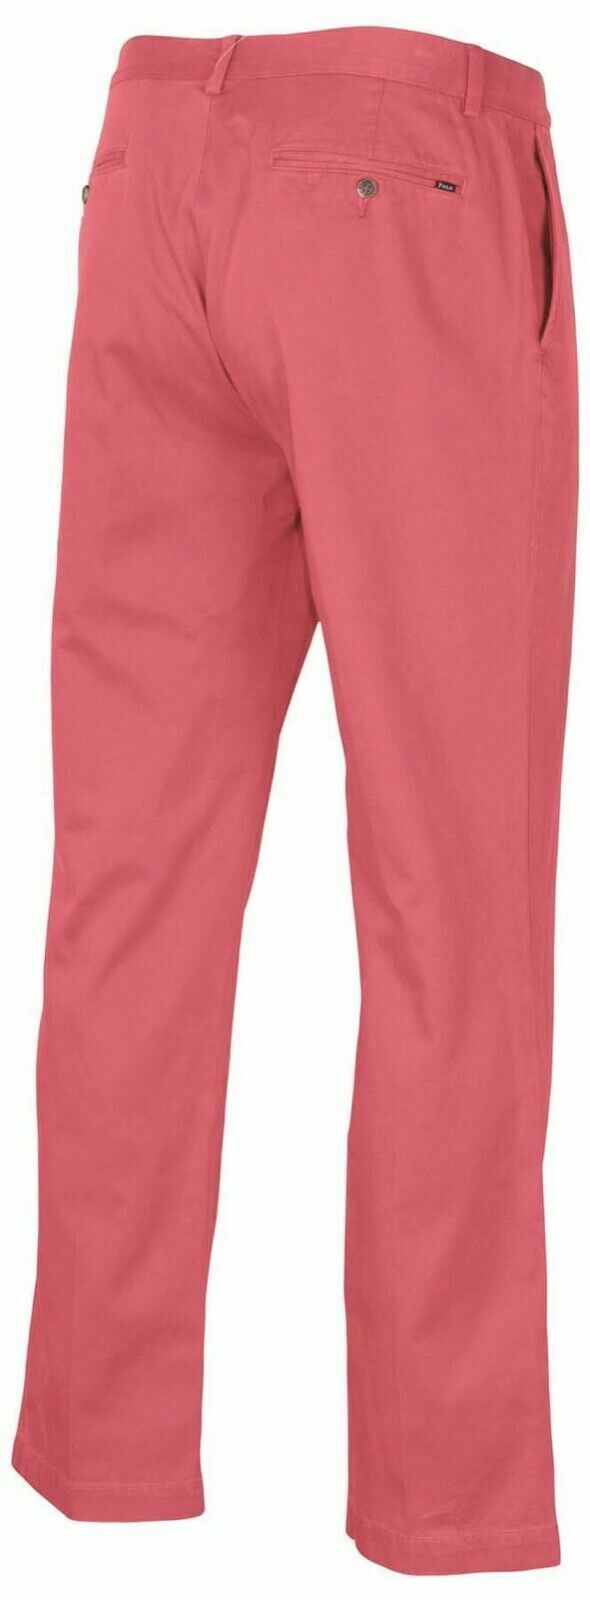 Ralph Lauren Polo Mens Stretch Classic Fit Chino Pants NANTKT Red